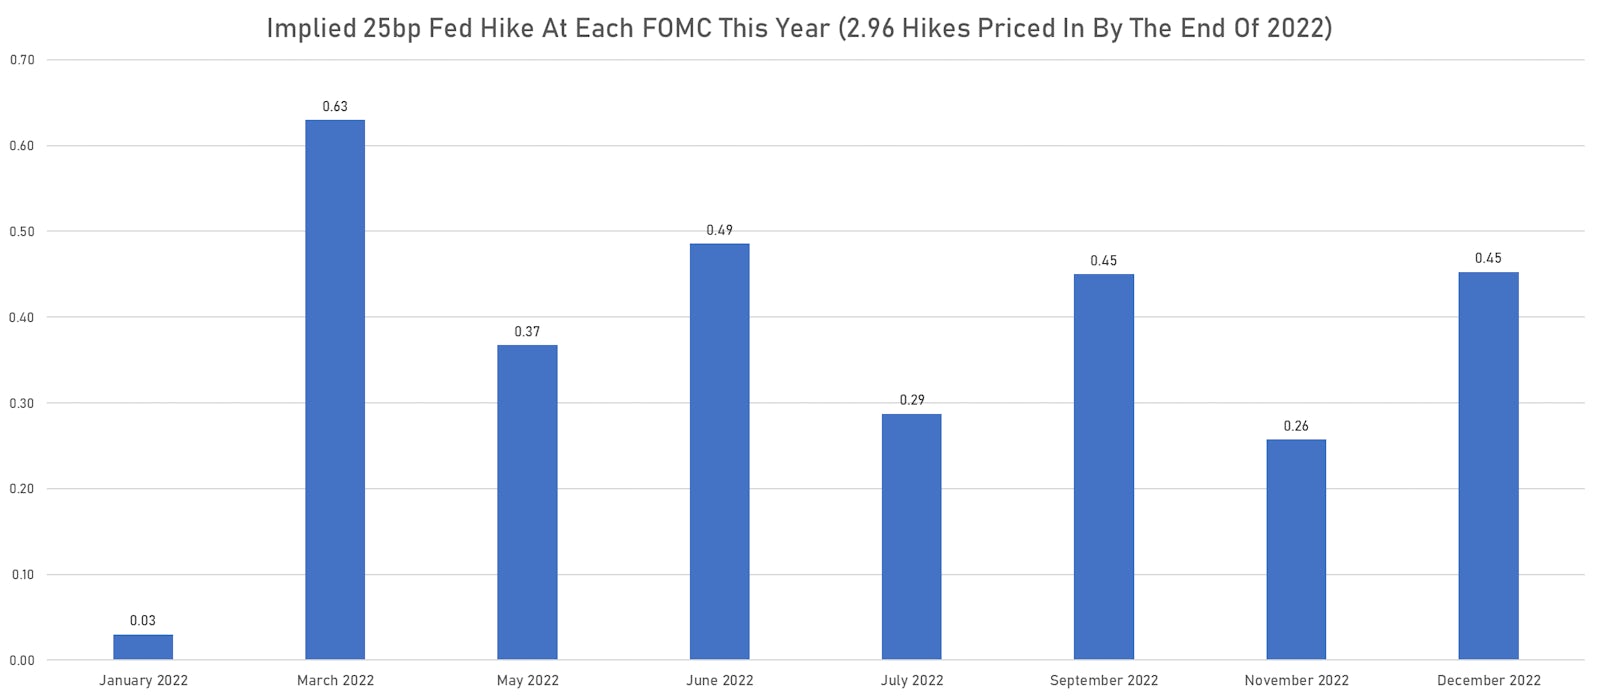 Timing Of Rate Hikes In 2022 Implied From Fed Funds Futures | Sources: ϕpost, Refinitiv data